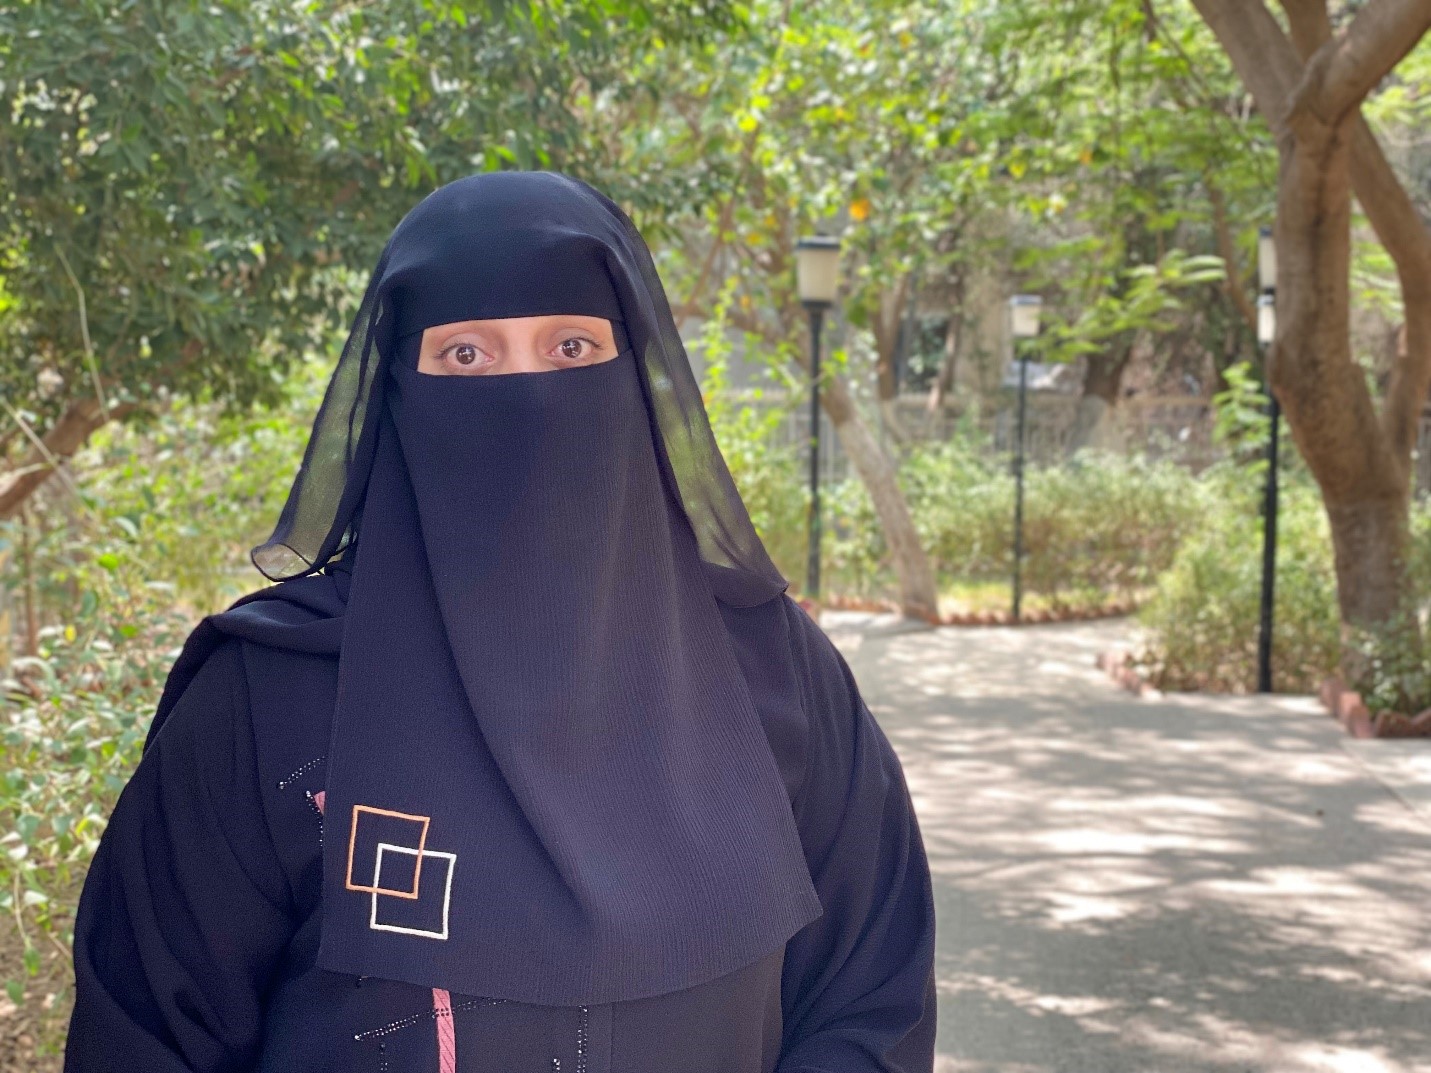 a woman wearing a black head covering